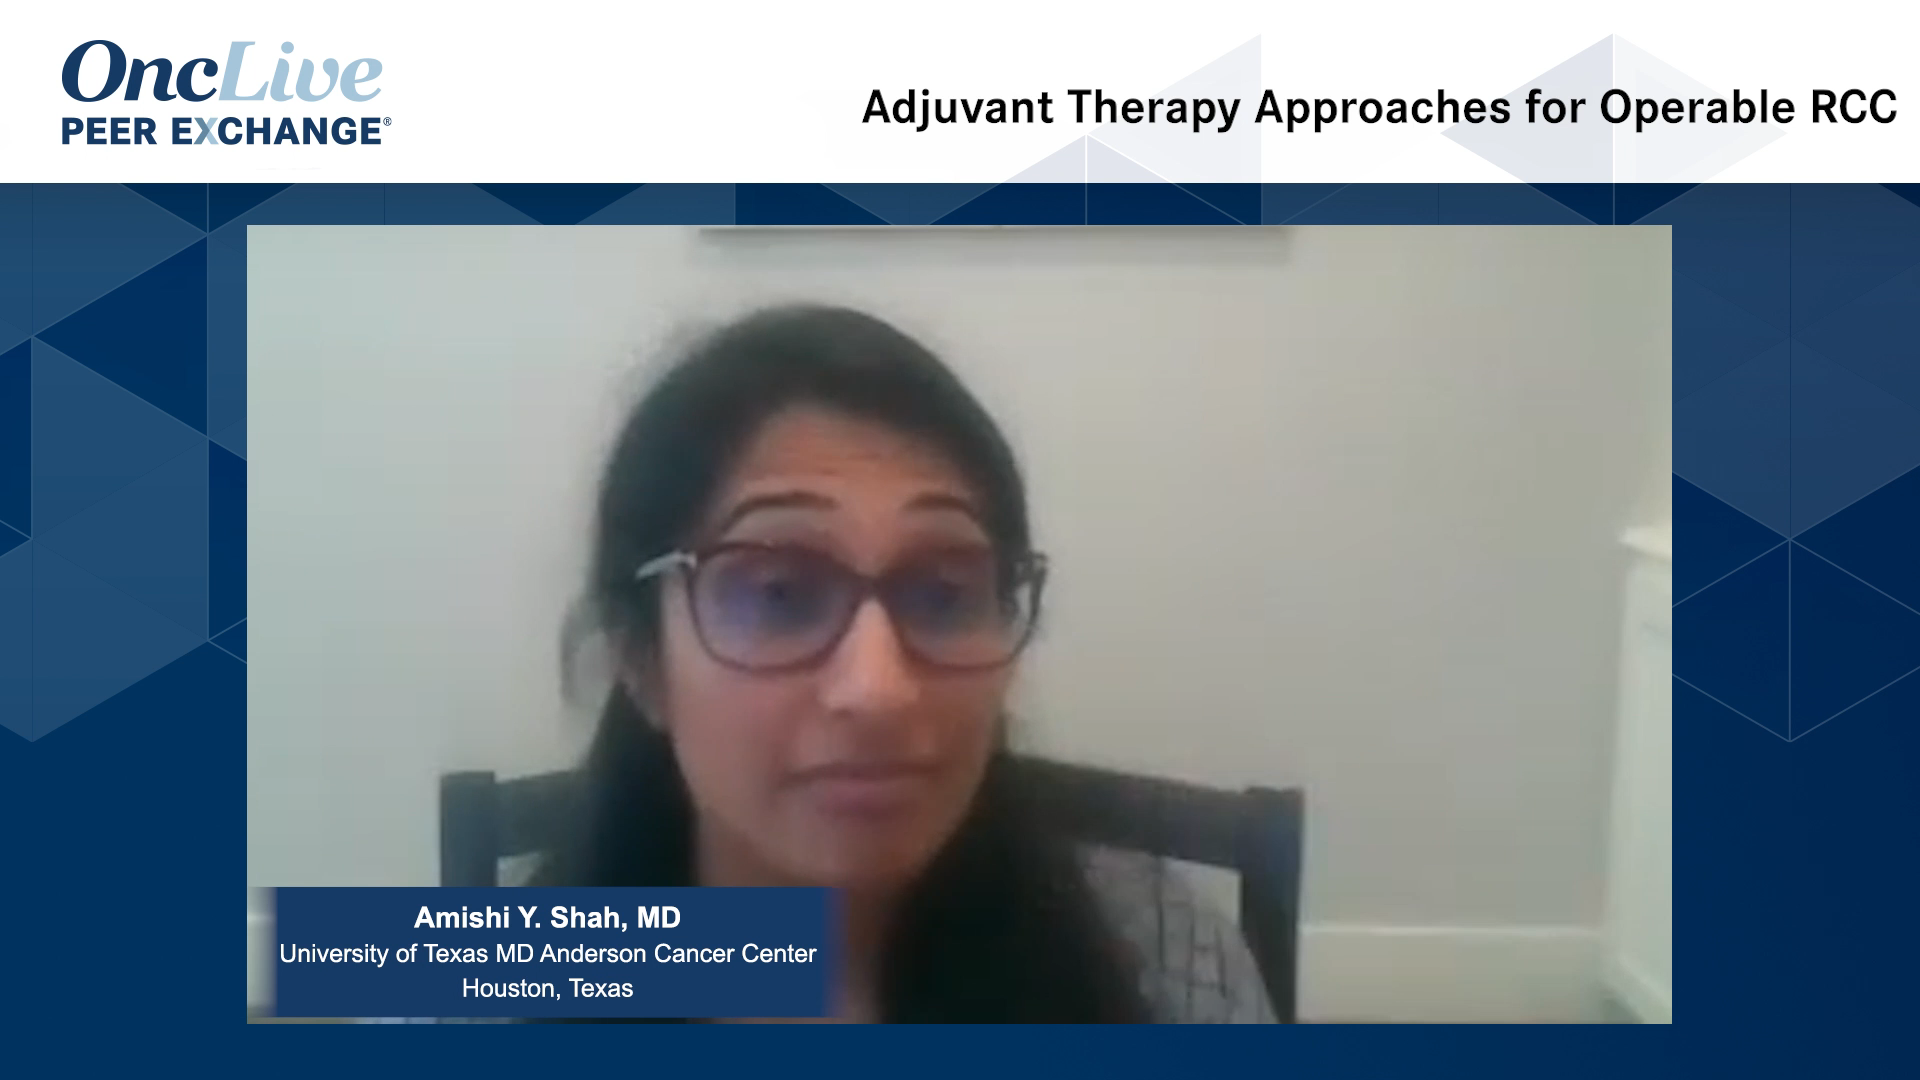 Adjuvant Therapy Approaches for Operable RCC